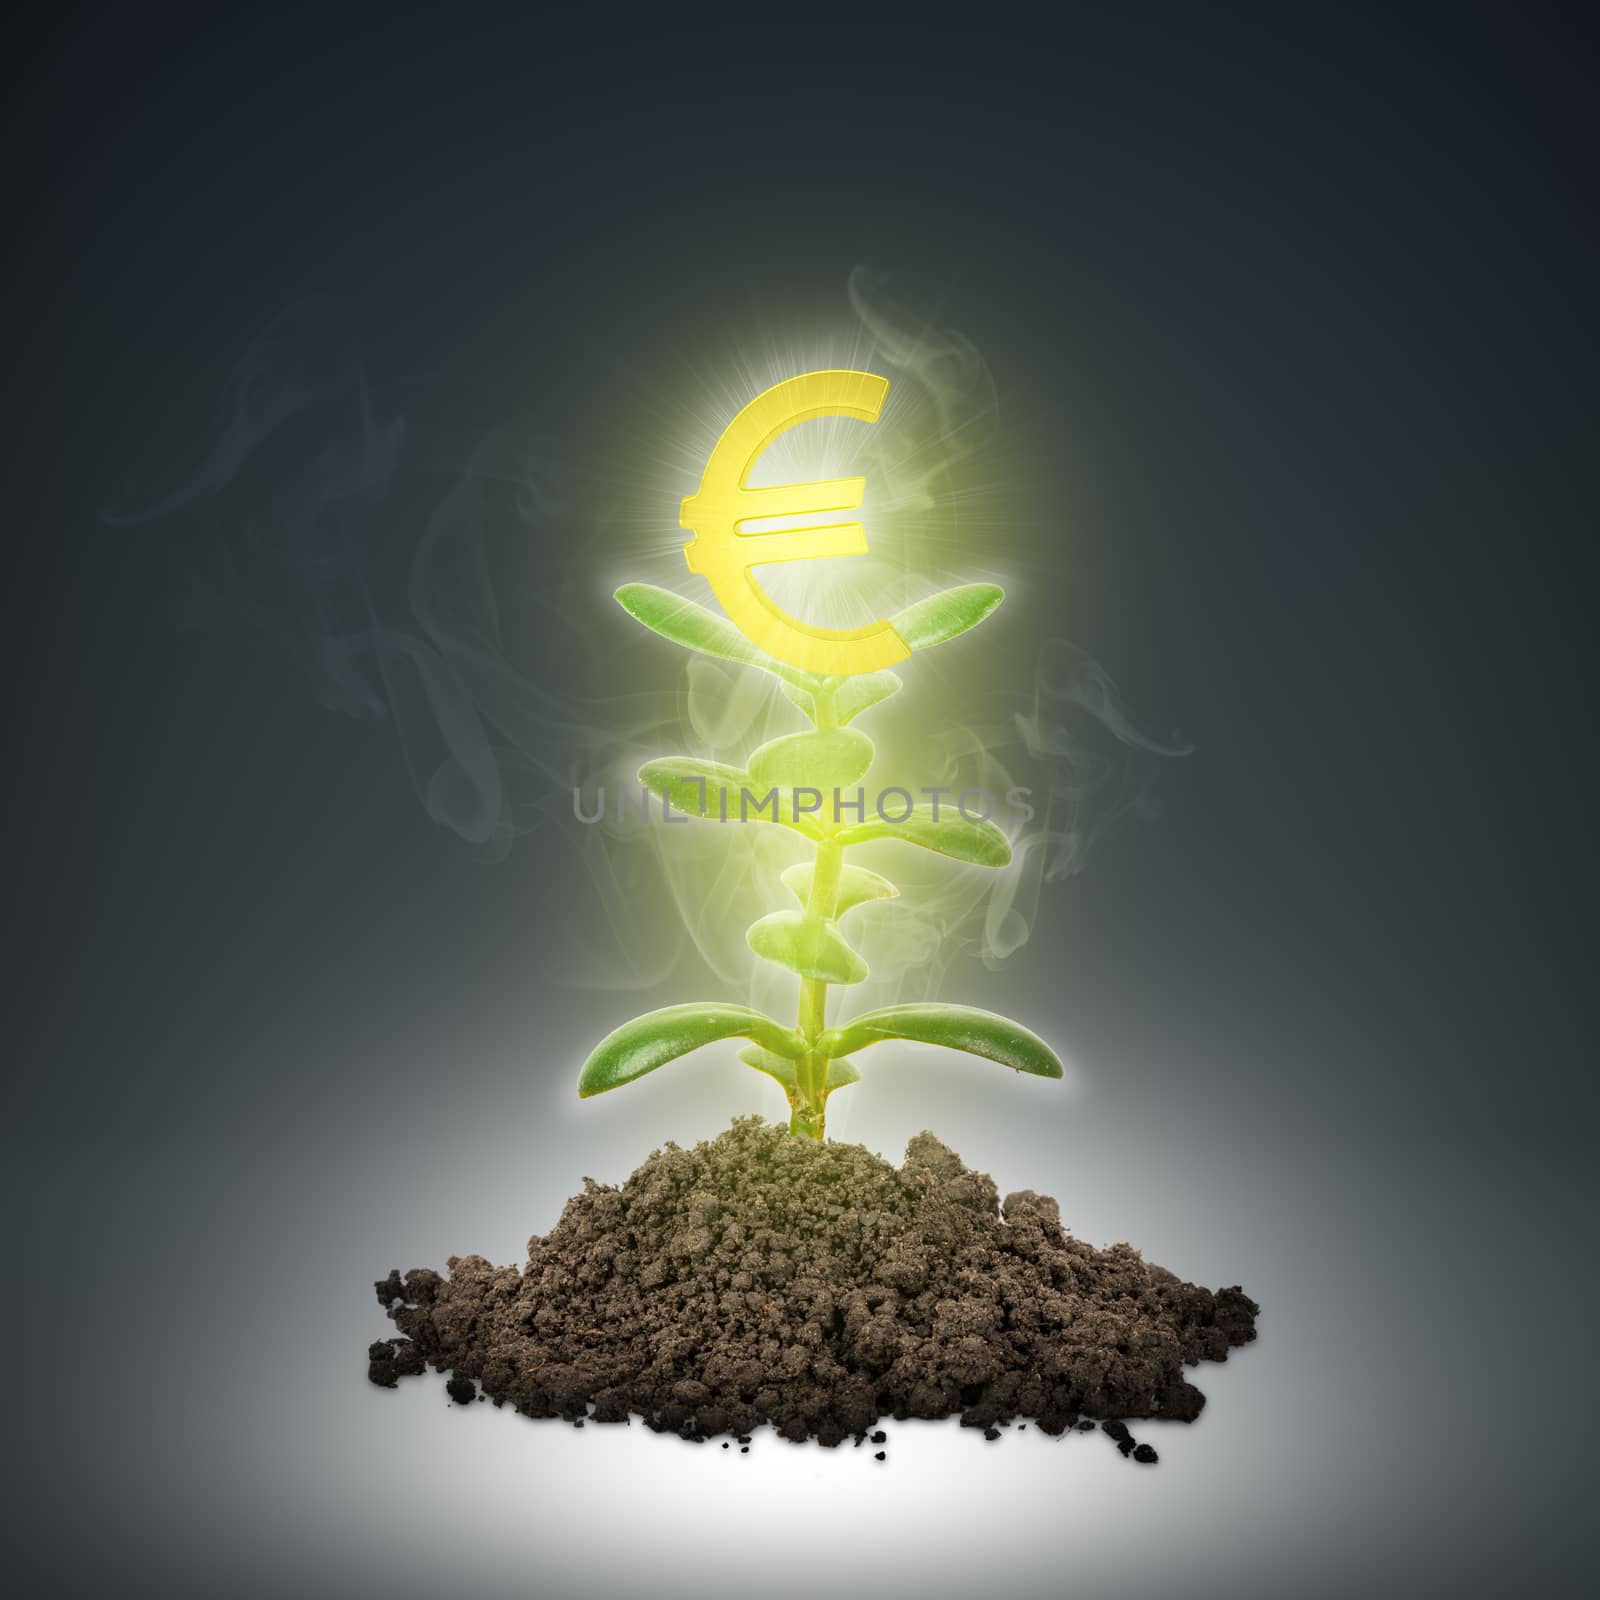 Ground with green plant and euro sign by cherezoff